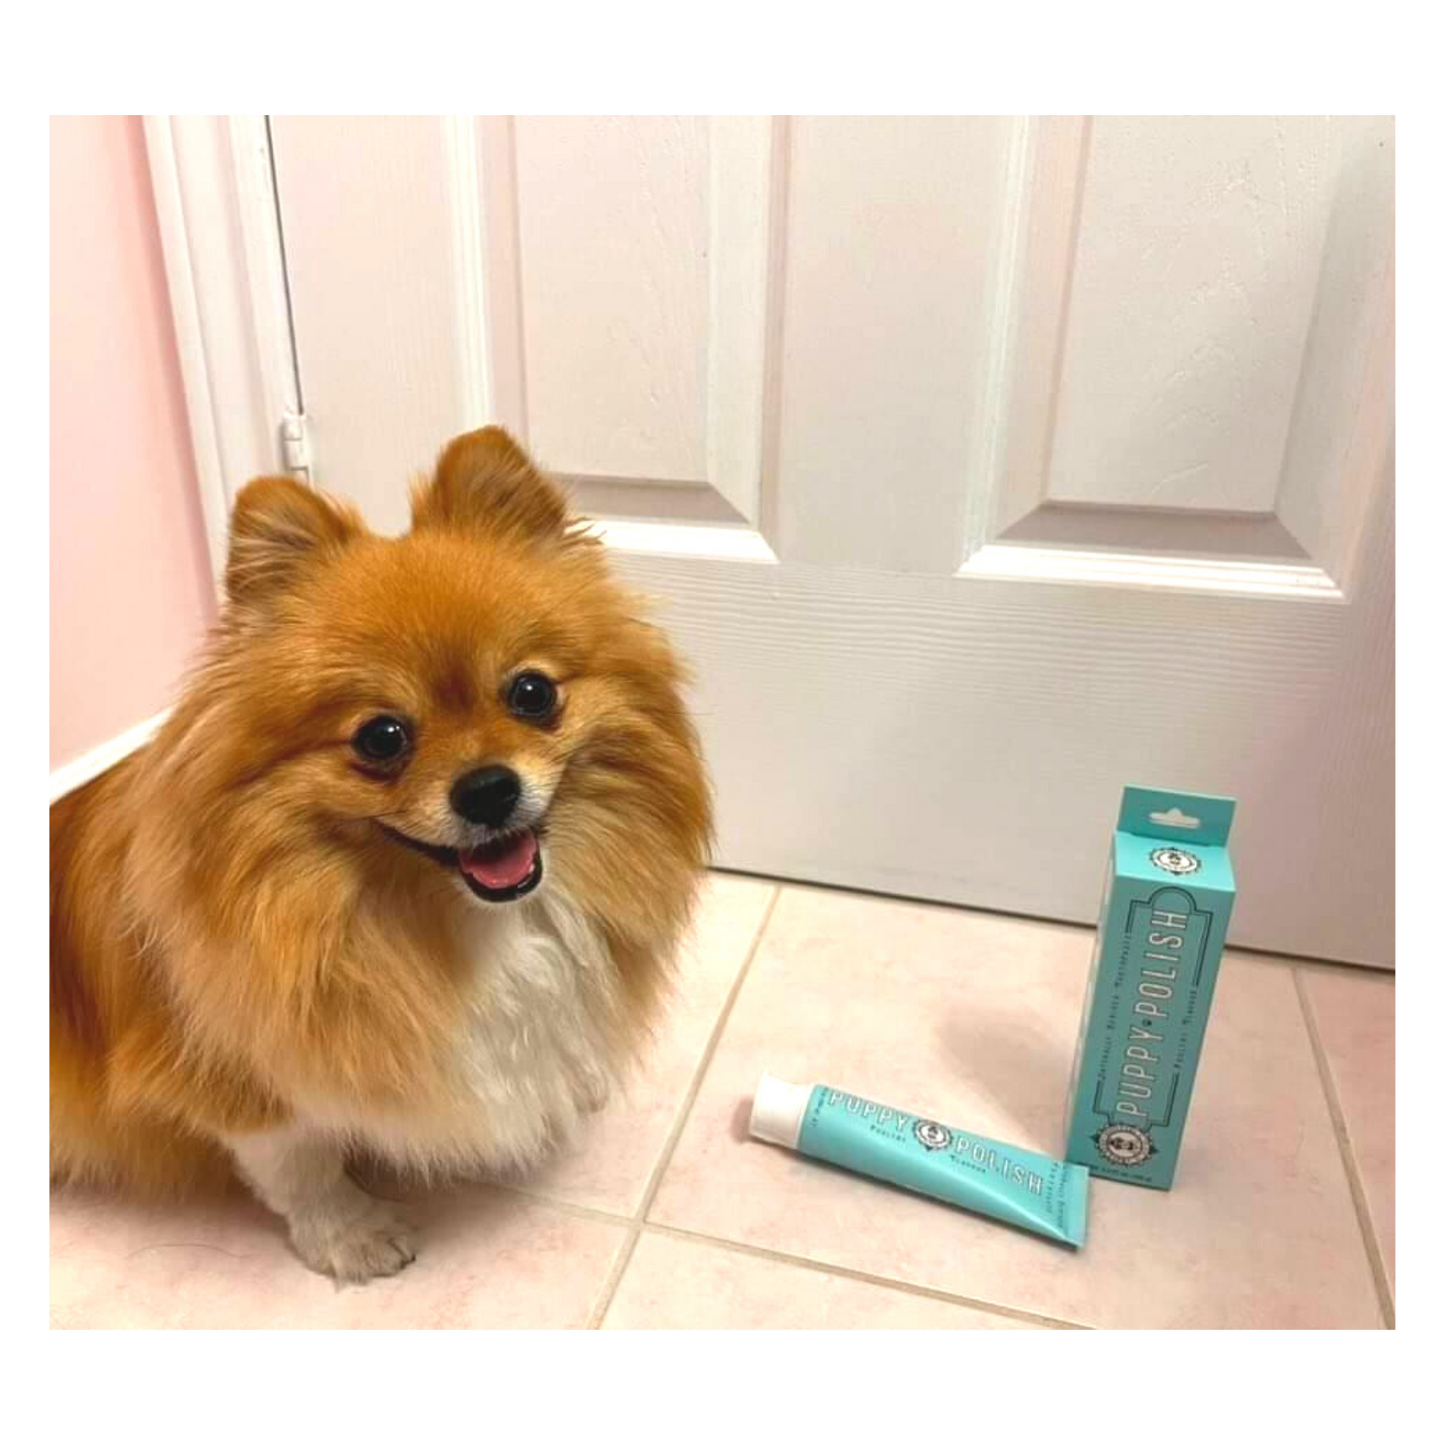 Pom with Wag & Bright Supply Puppy Polisher Toothpaste 